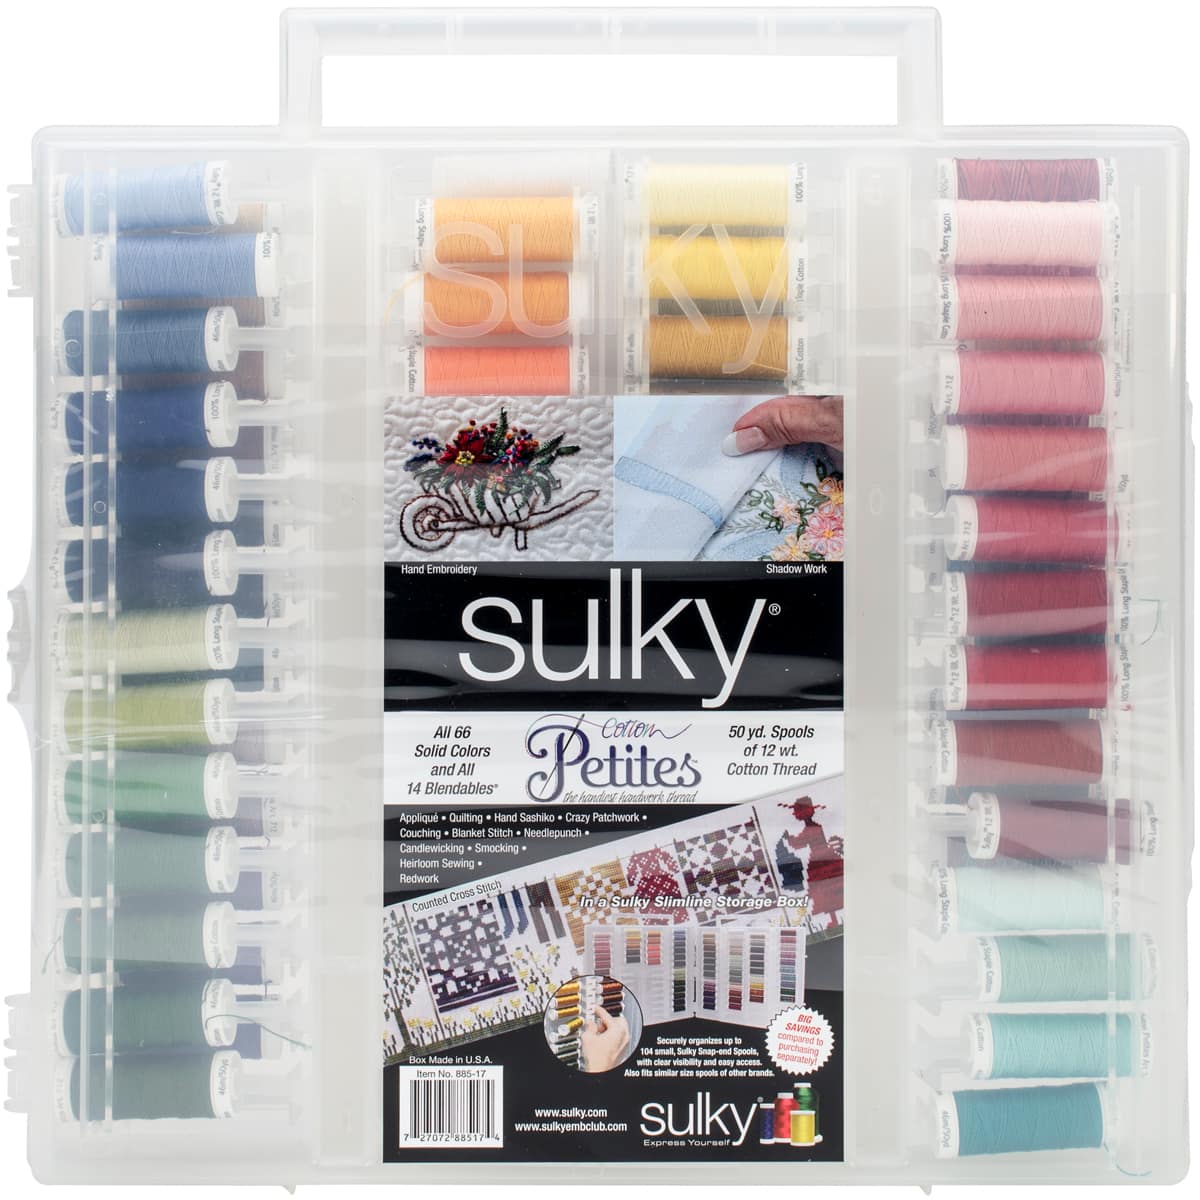 The Perfect Sulky Tee Kit